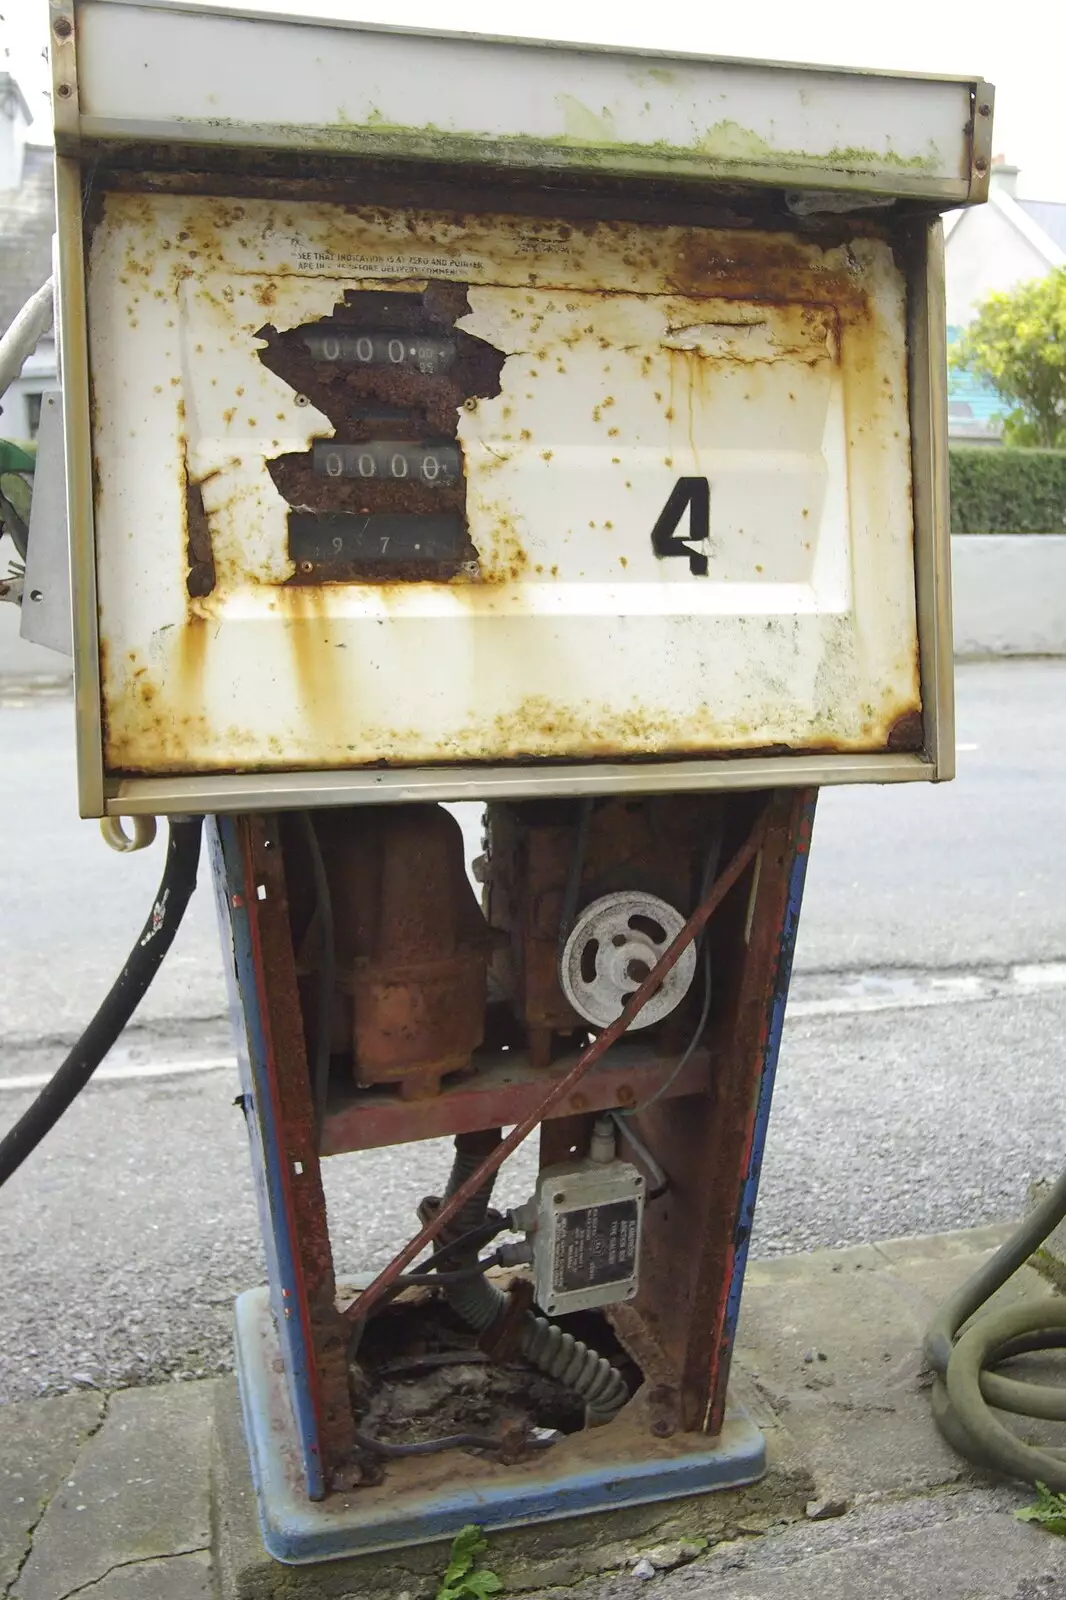 A derelict petrol pump, from Kilkee to Galway, Connacht, Ireland - 23rd September 2007